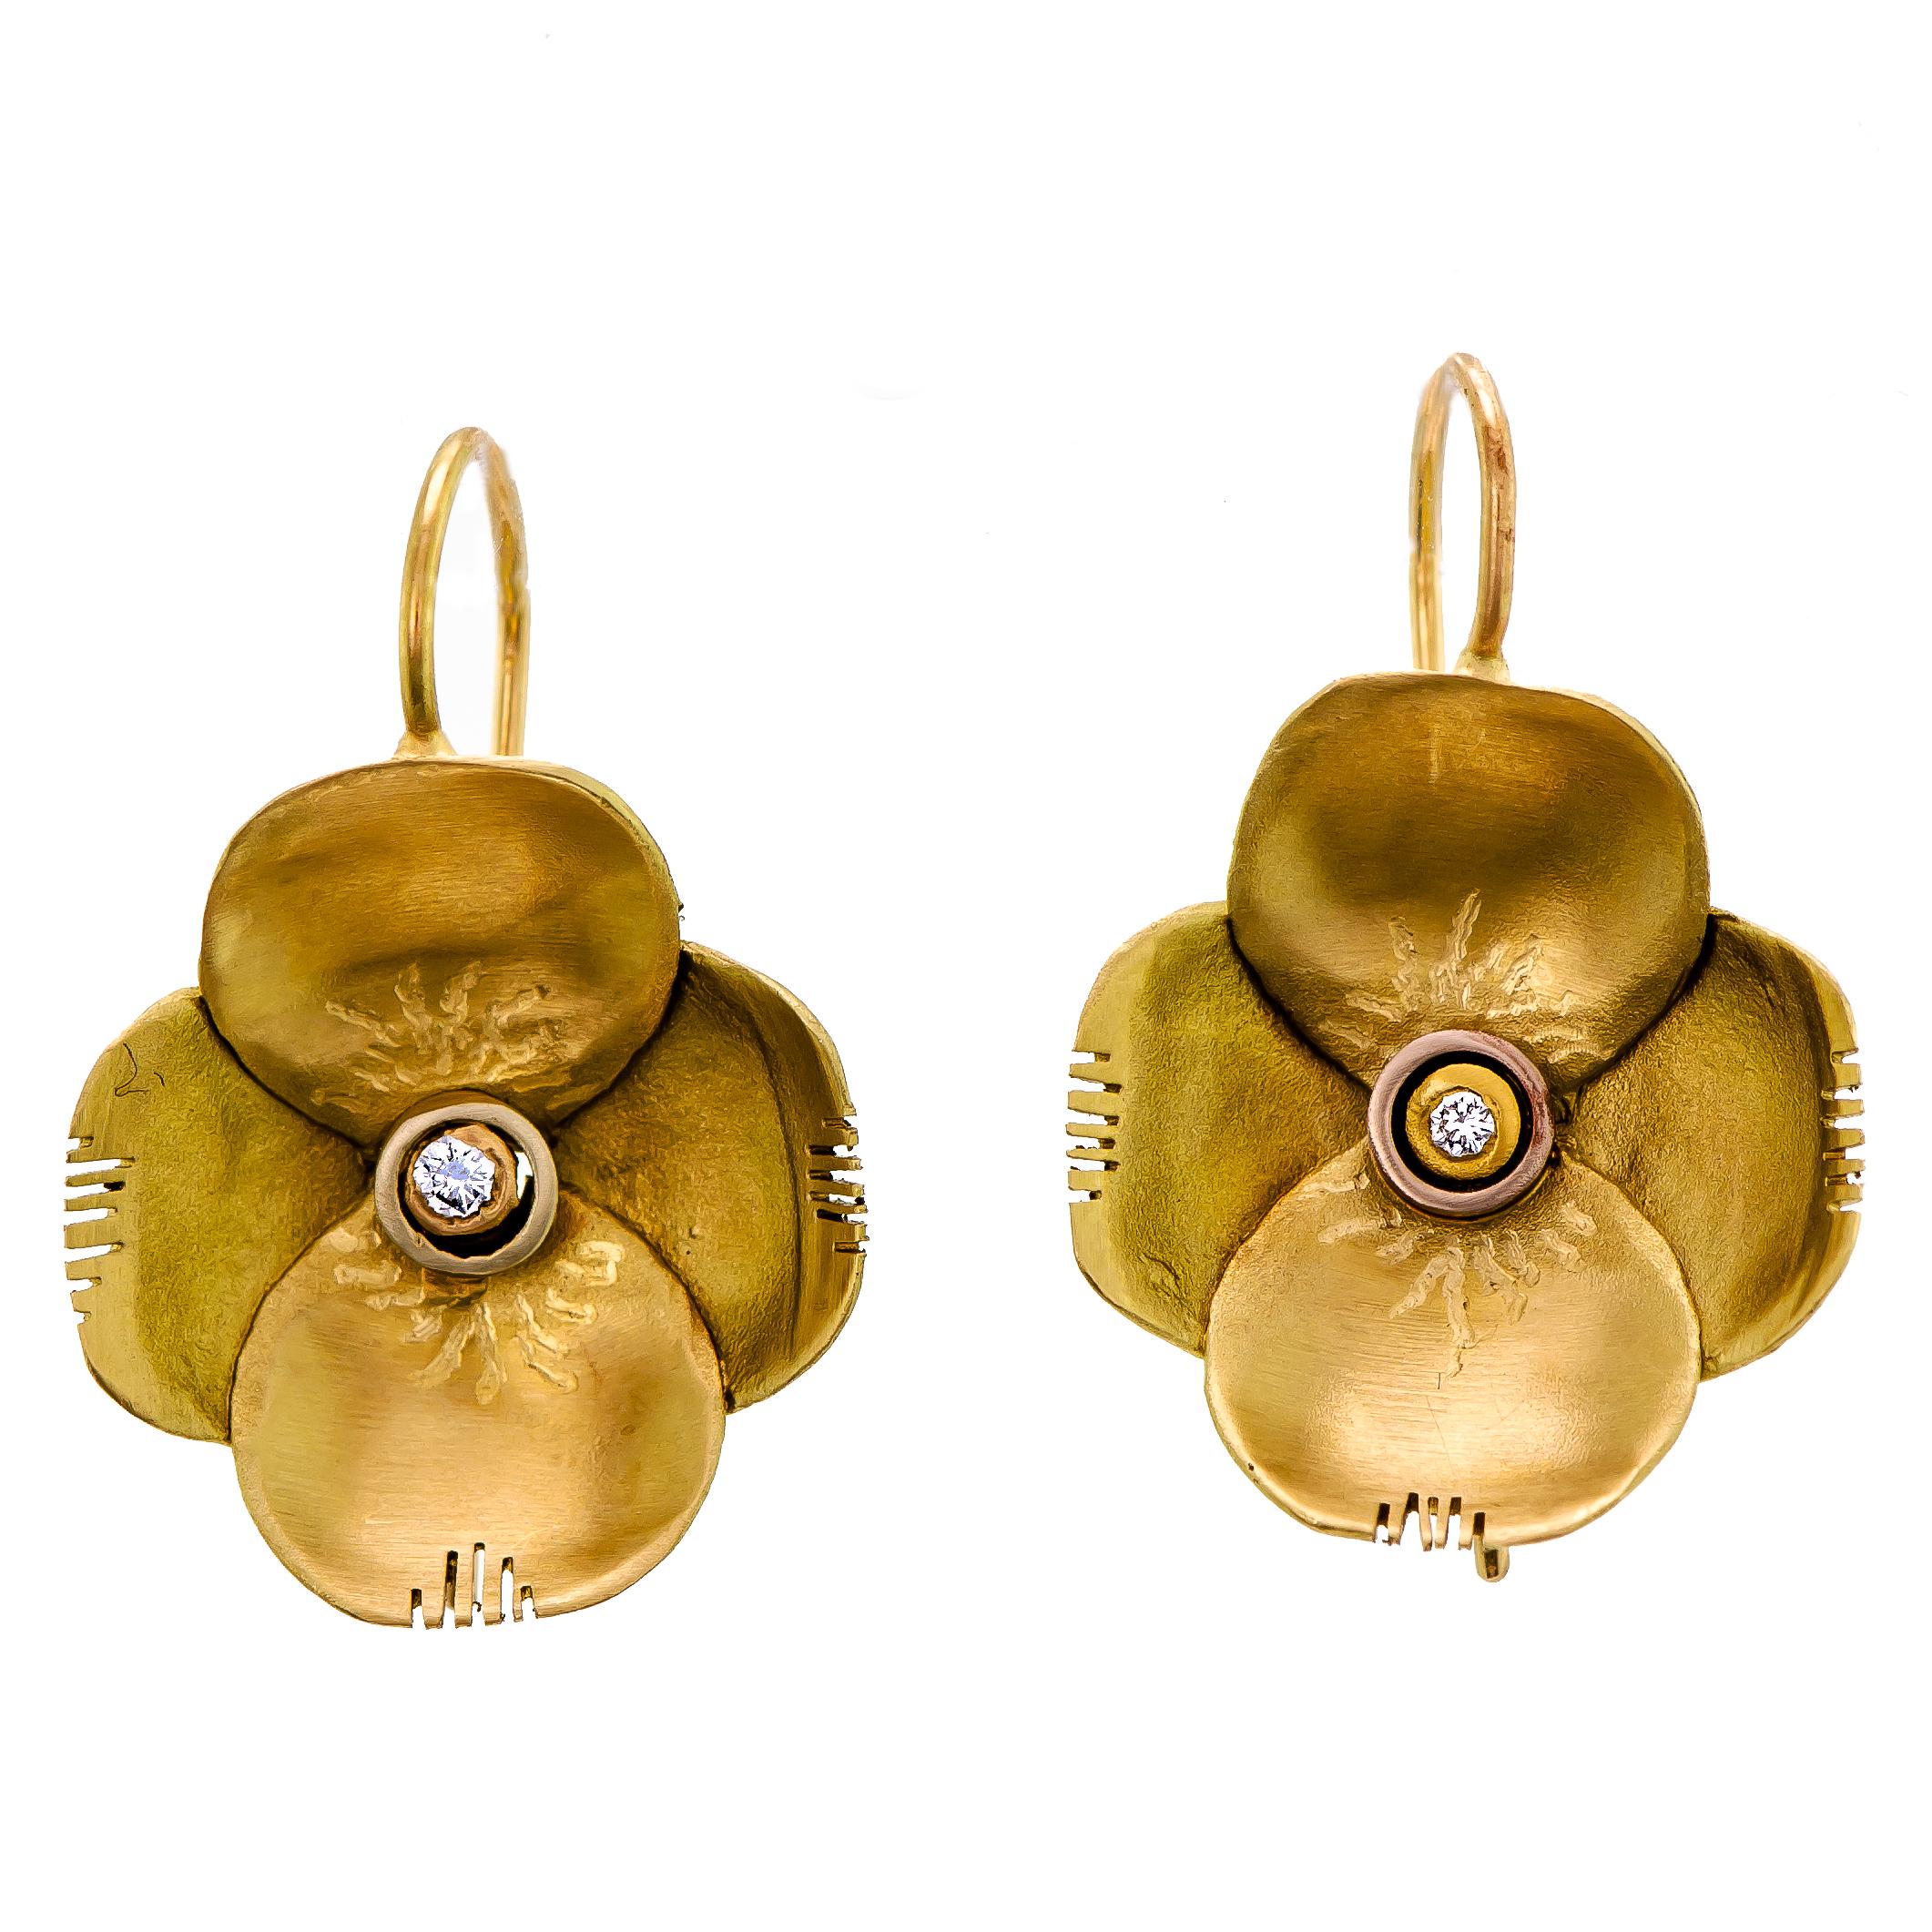 22 Karat Diamond Brushed Gold Flower Pansy Form Wireback Earrings In Good Condition For Sale In Wheaton, IL